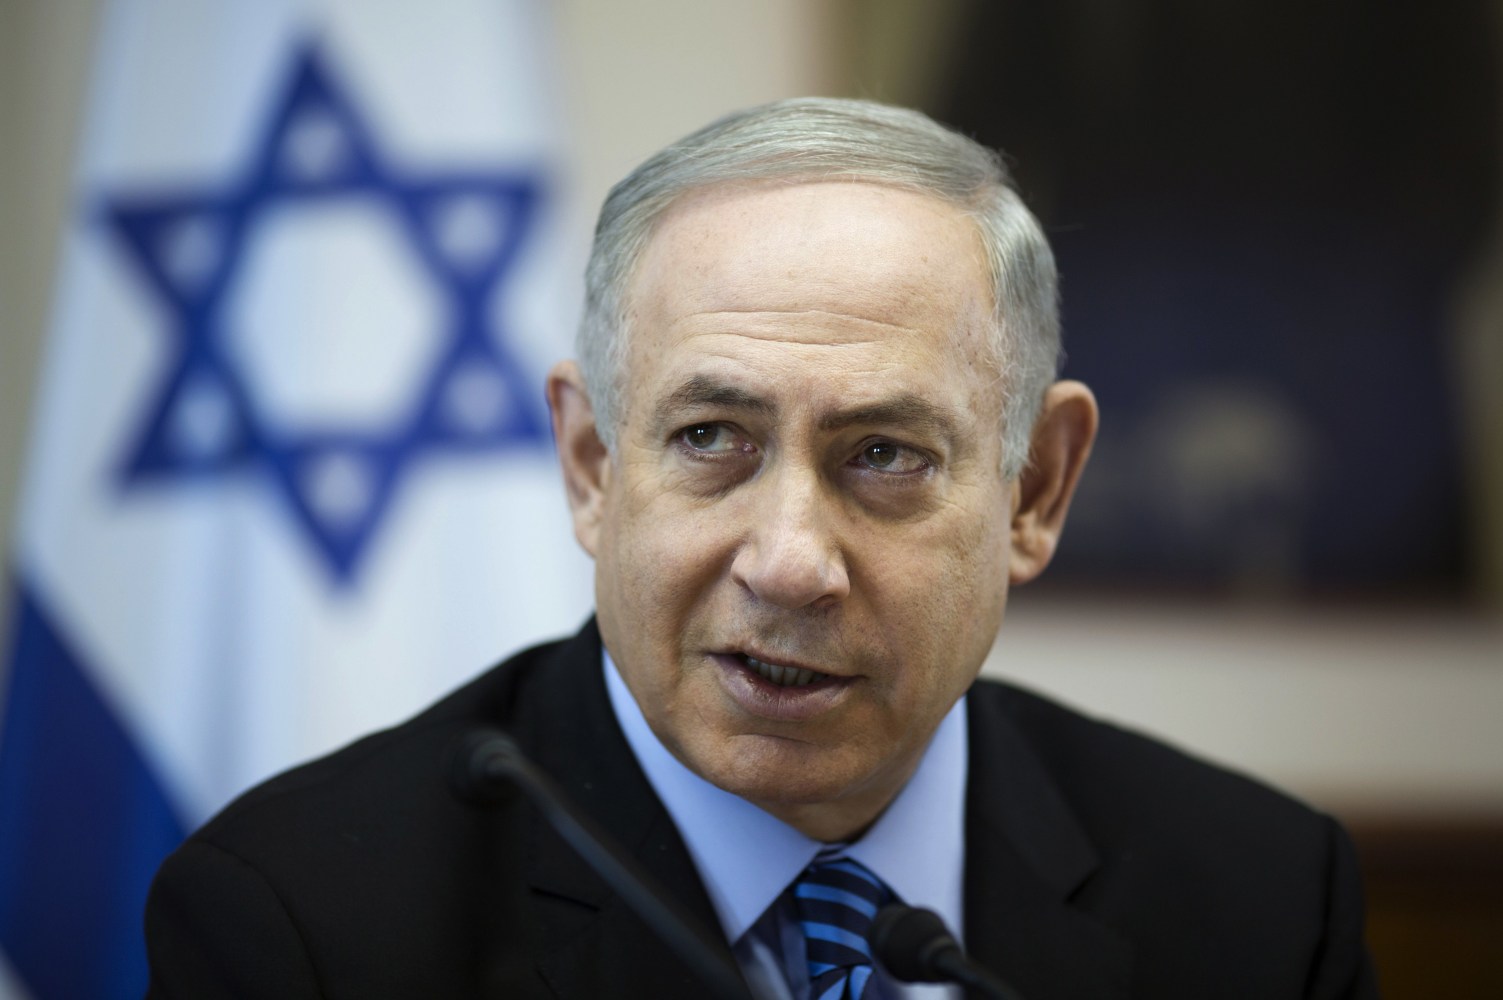 A biography of benjamin netanyahu the current prime minister of israel